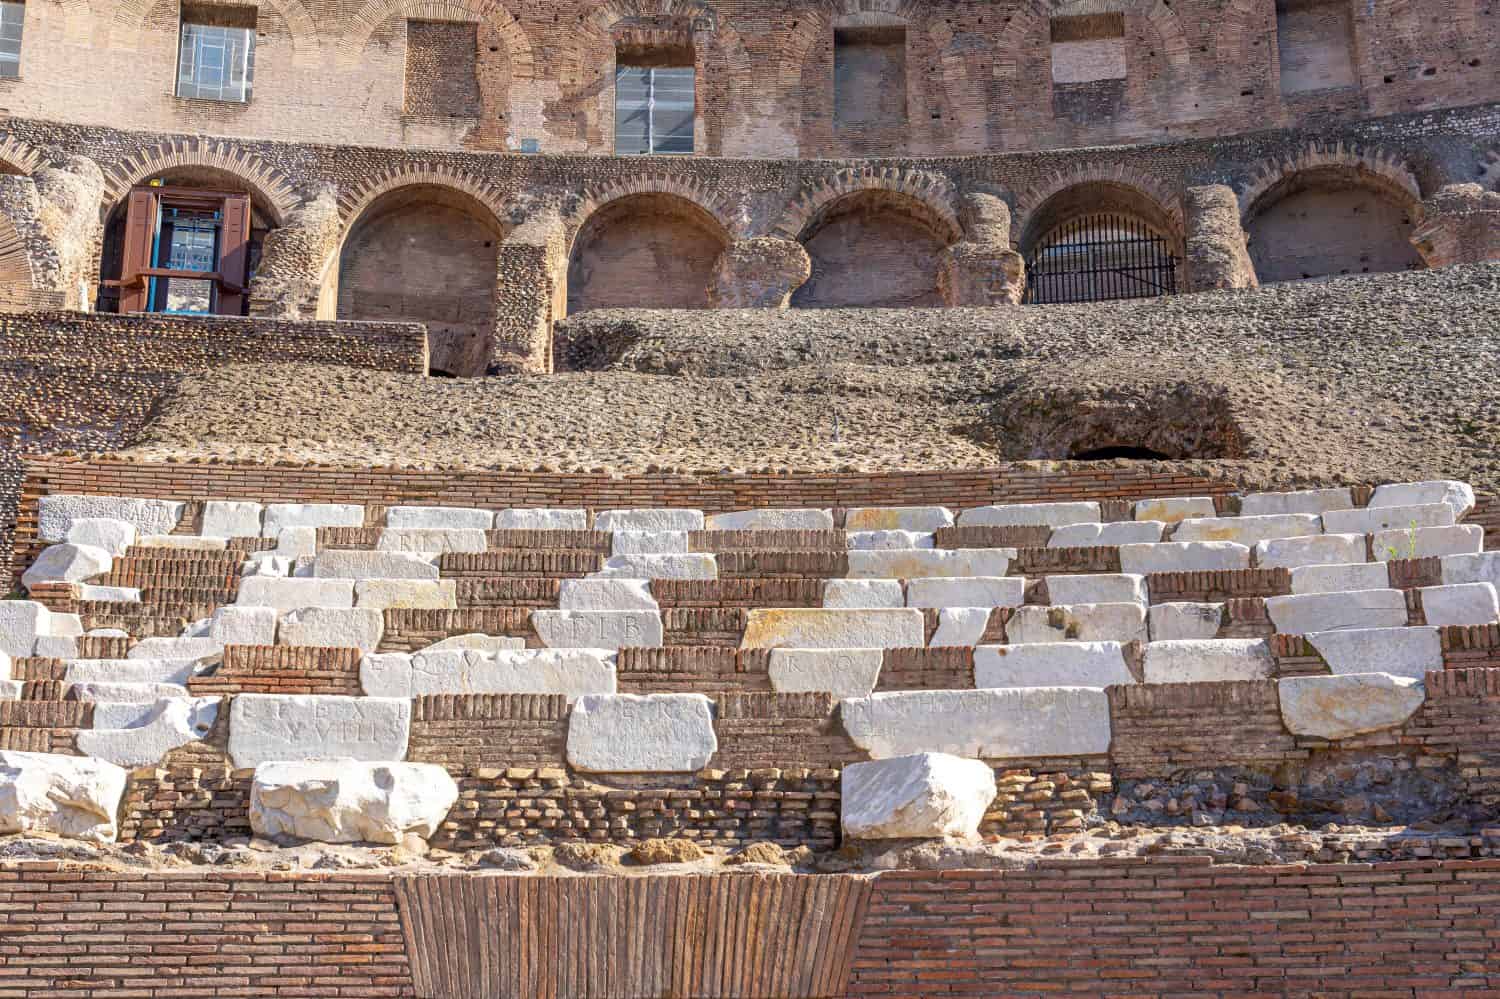 Stairs and seats for spectators in good condition inside the Colosseum in Rome